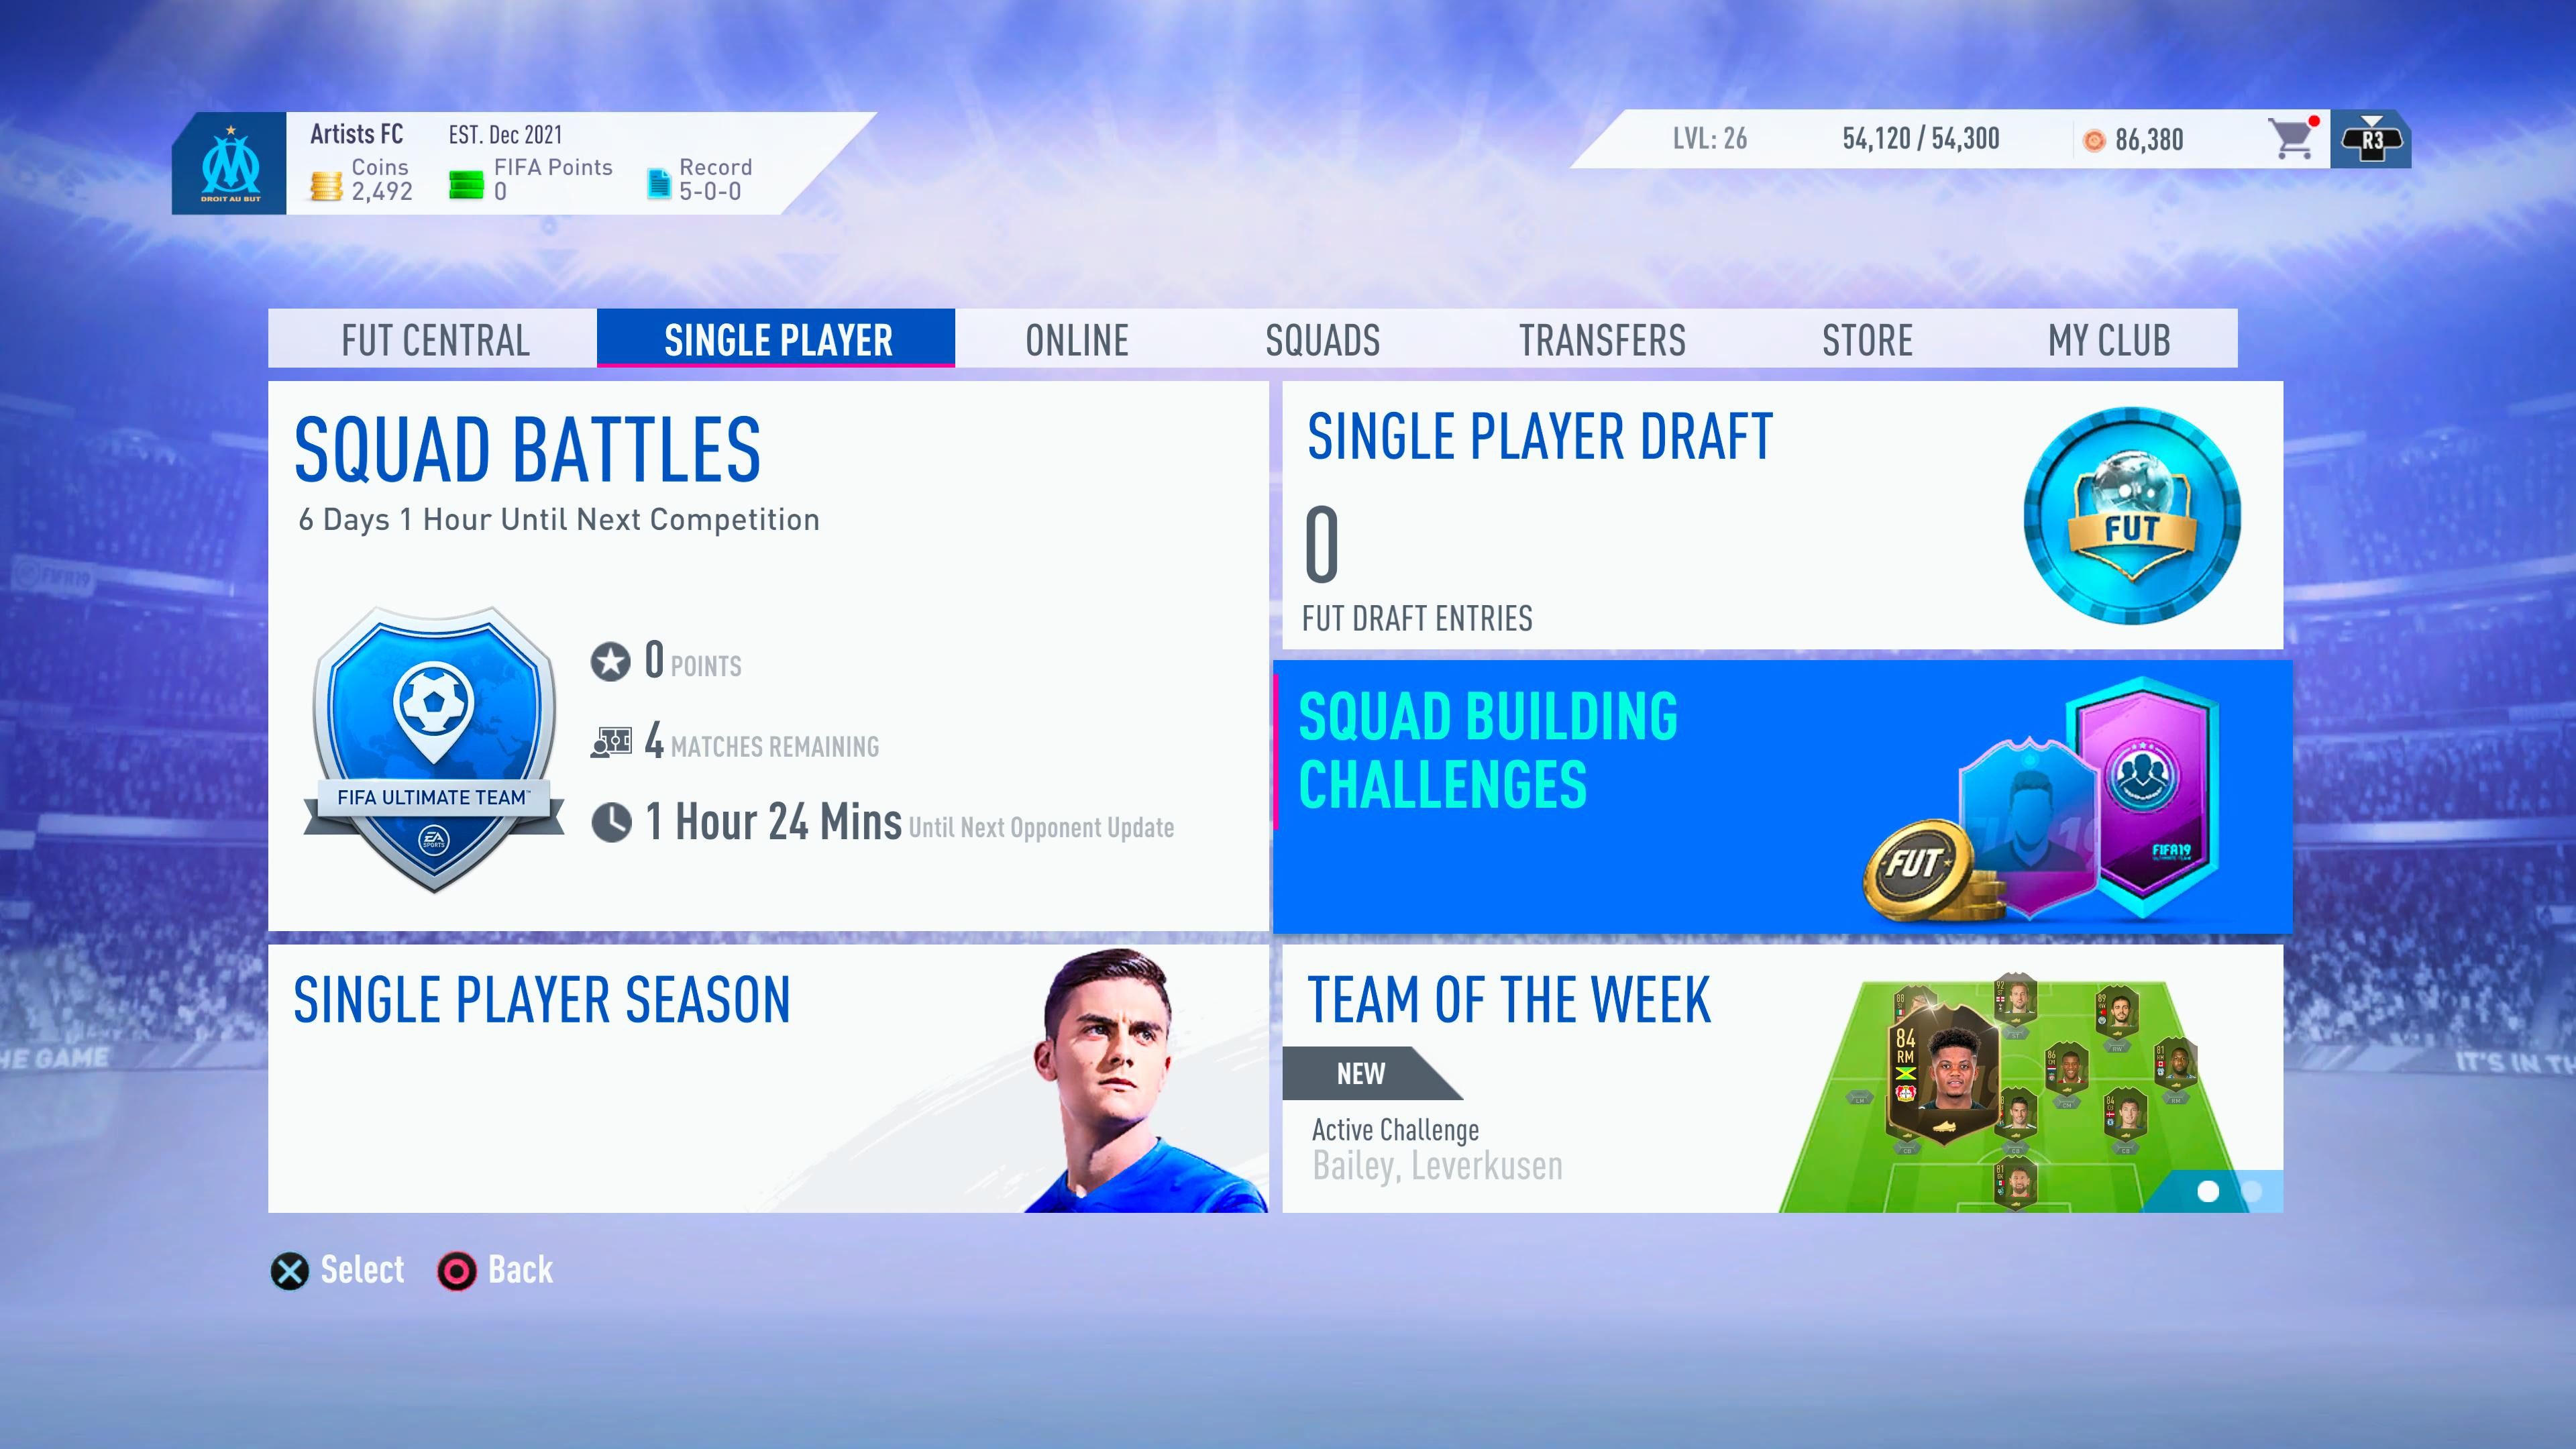 FIFA 19 Ultimate Team guide: getting started, tips and all the new